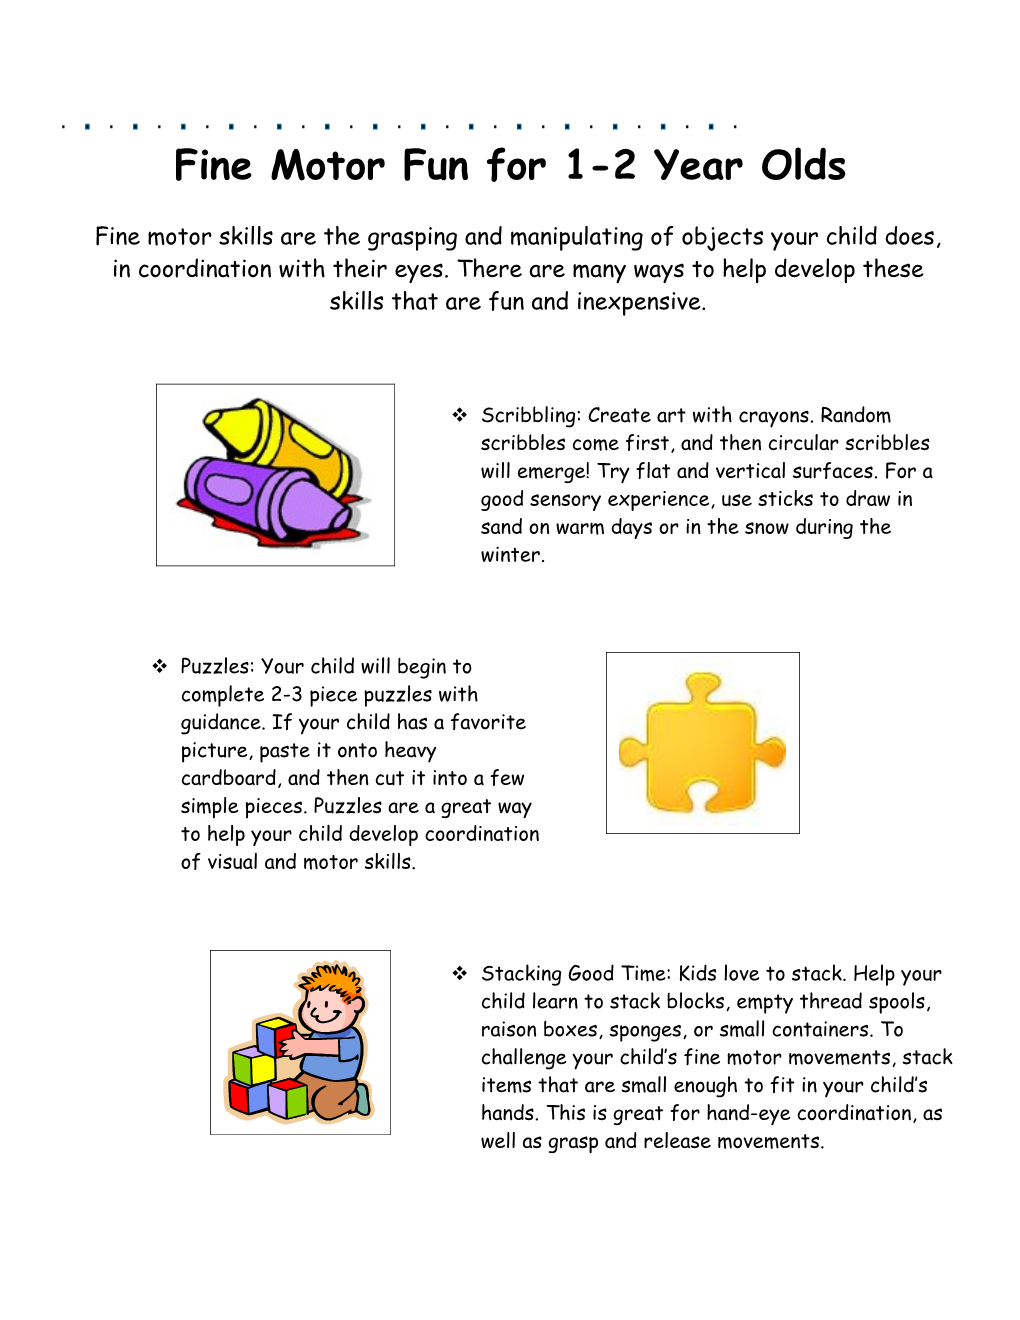 Fine Motor Fun for 1-2 Year Olds